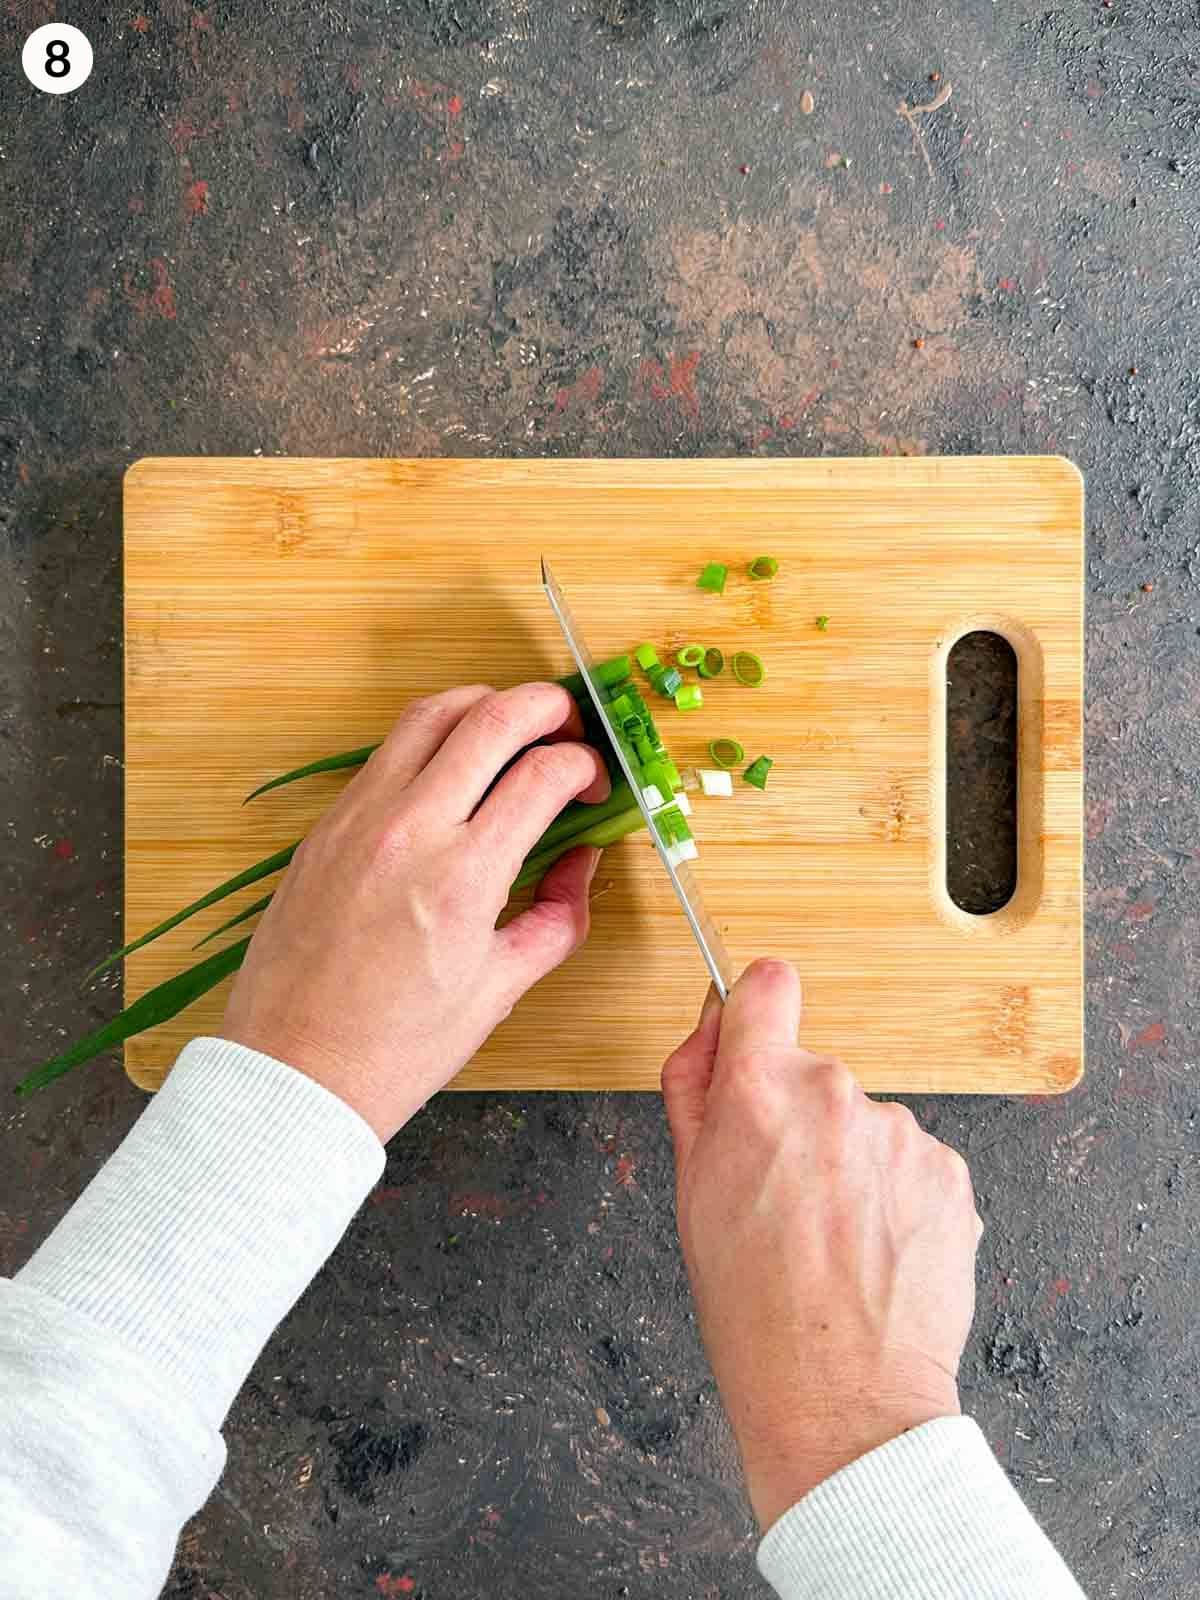 Chopping scallions with a knife on a wooden chopping board